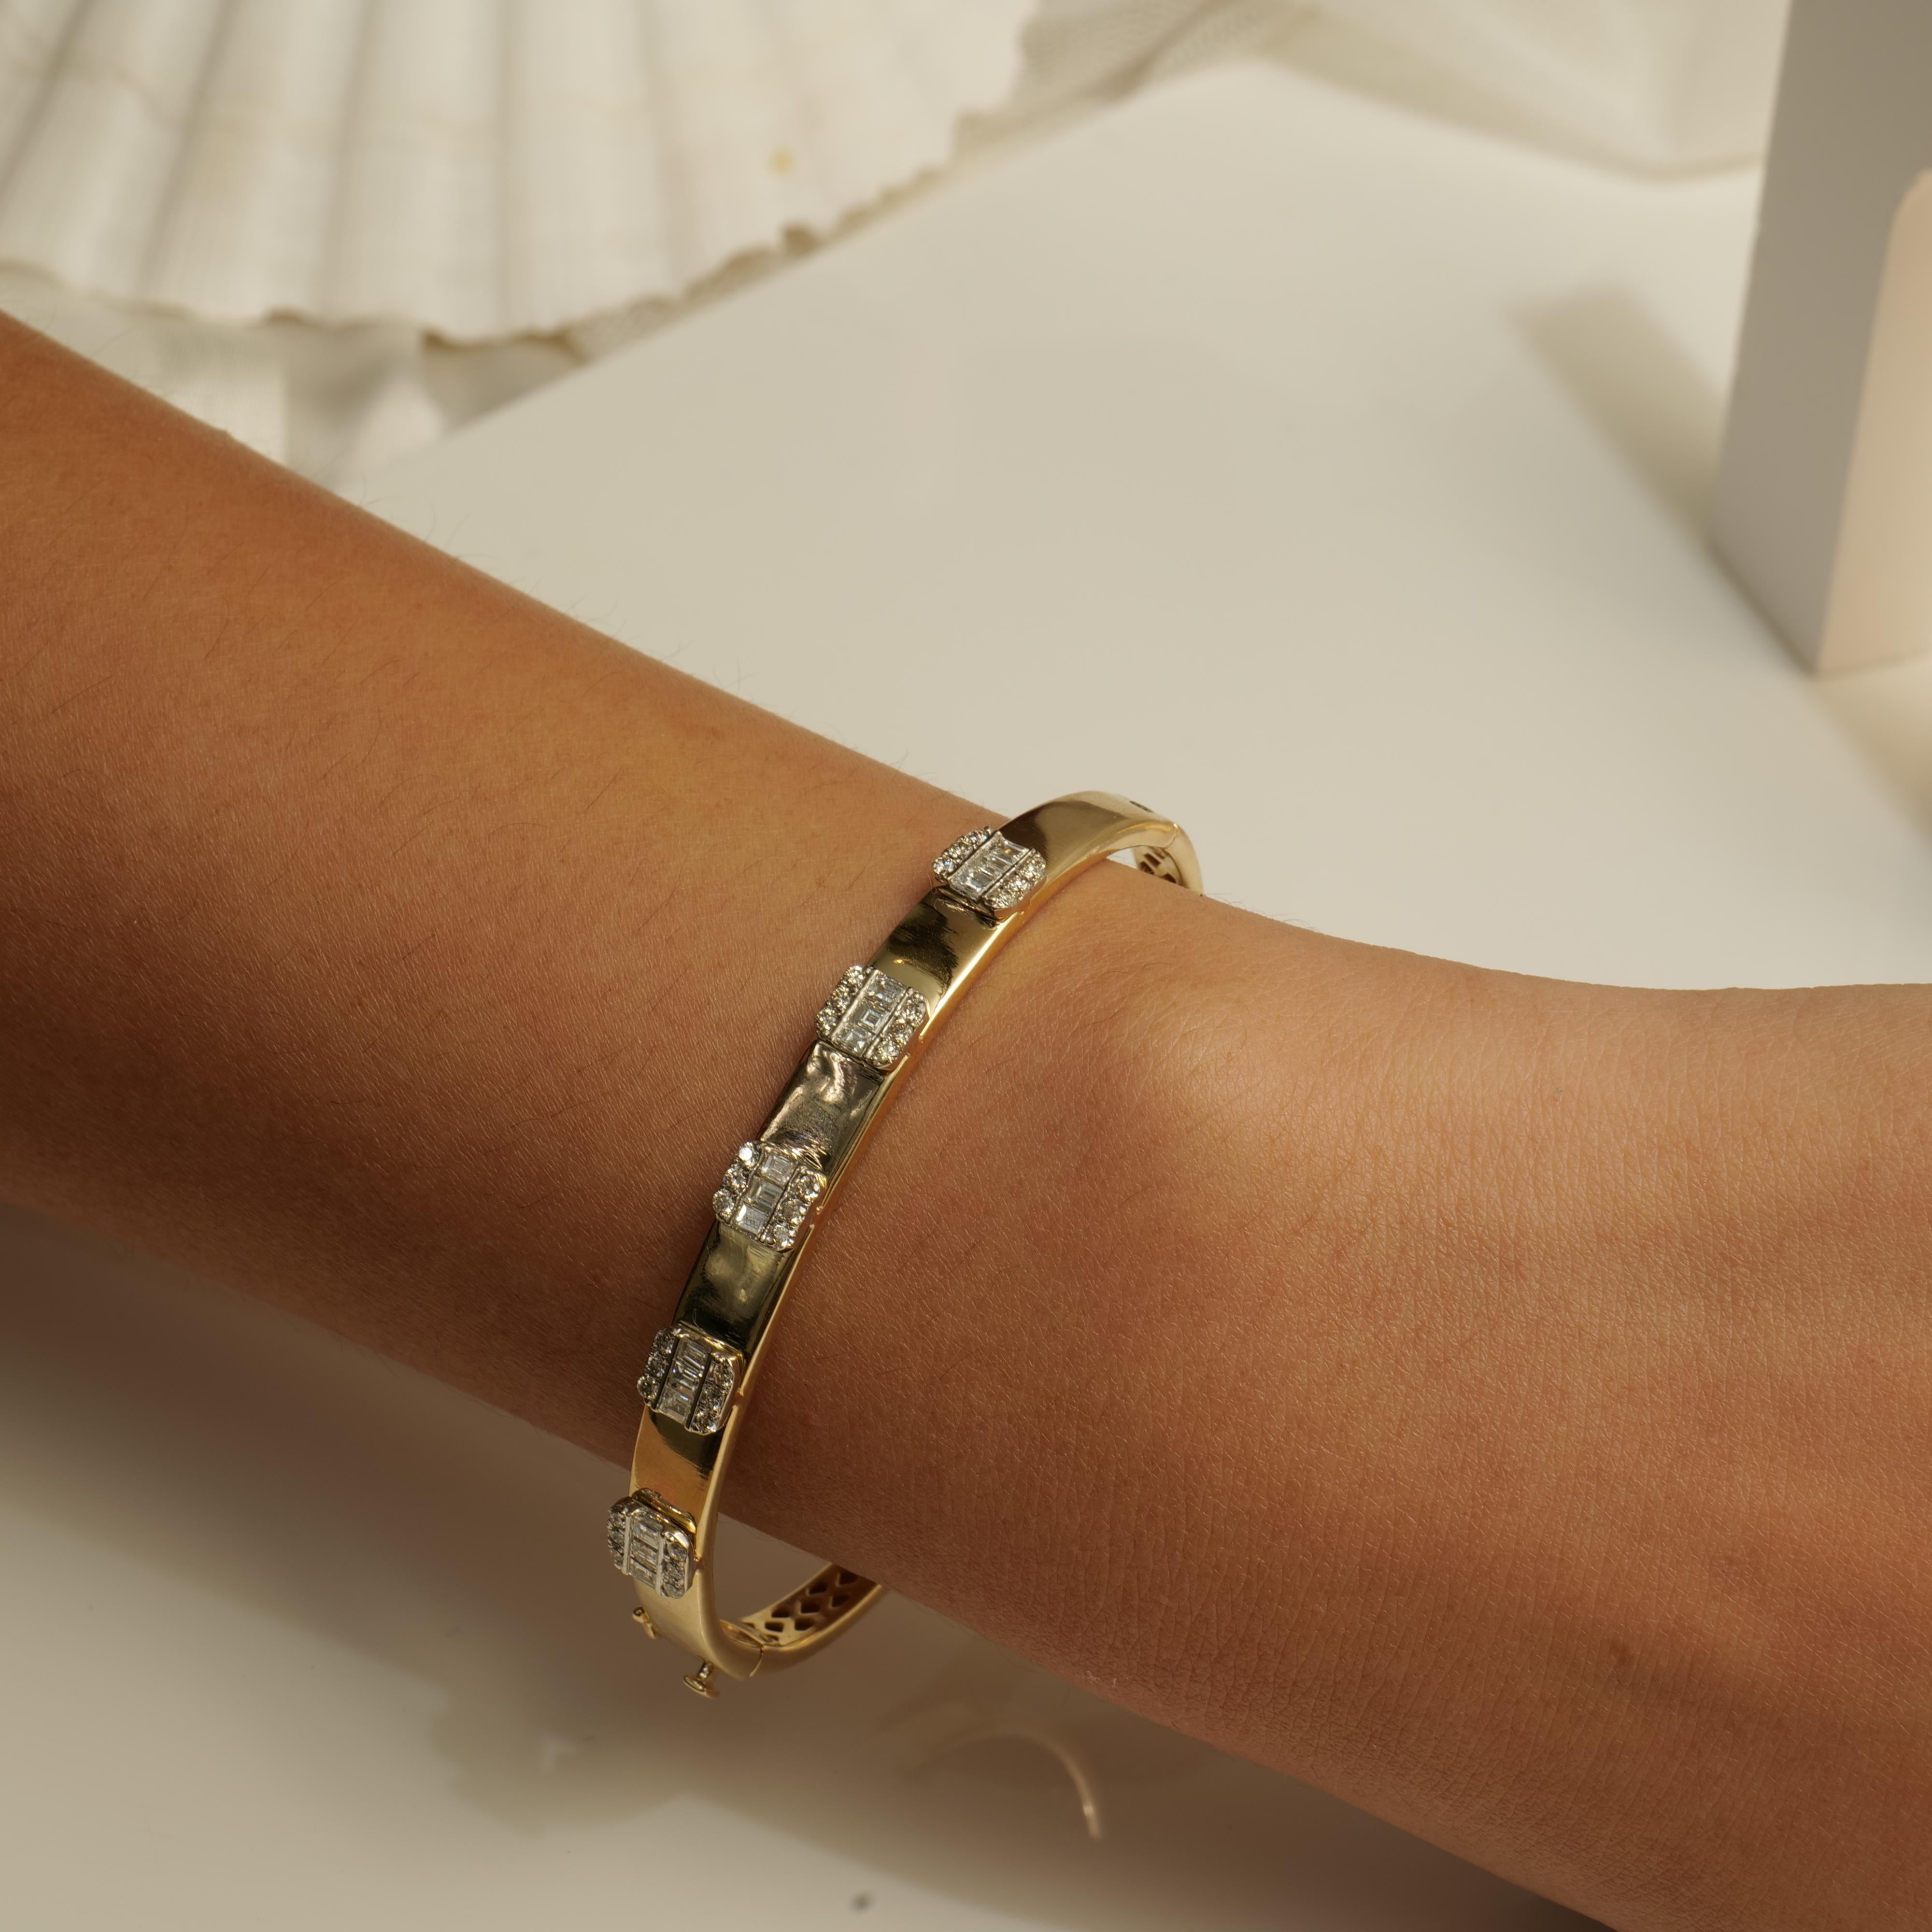 
The Solid Baguette & Round Diamond Bracelet in 18K Solid Gold is a masterpiece of design and craftsmanship. The illusion setting creates a mesmerizing effect, making the diamonds appear larger and even more brilliant. With a stunning combination of